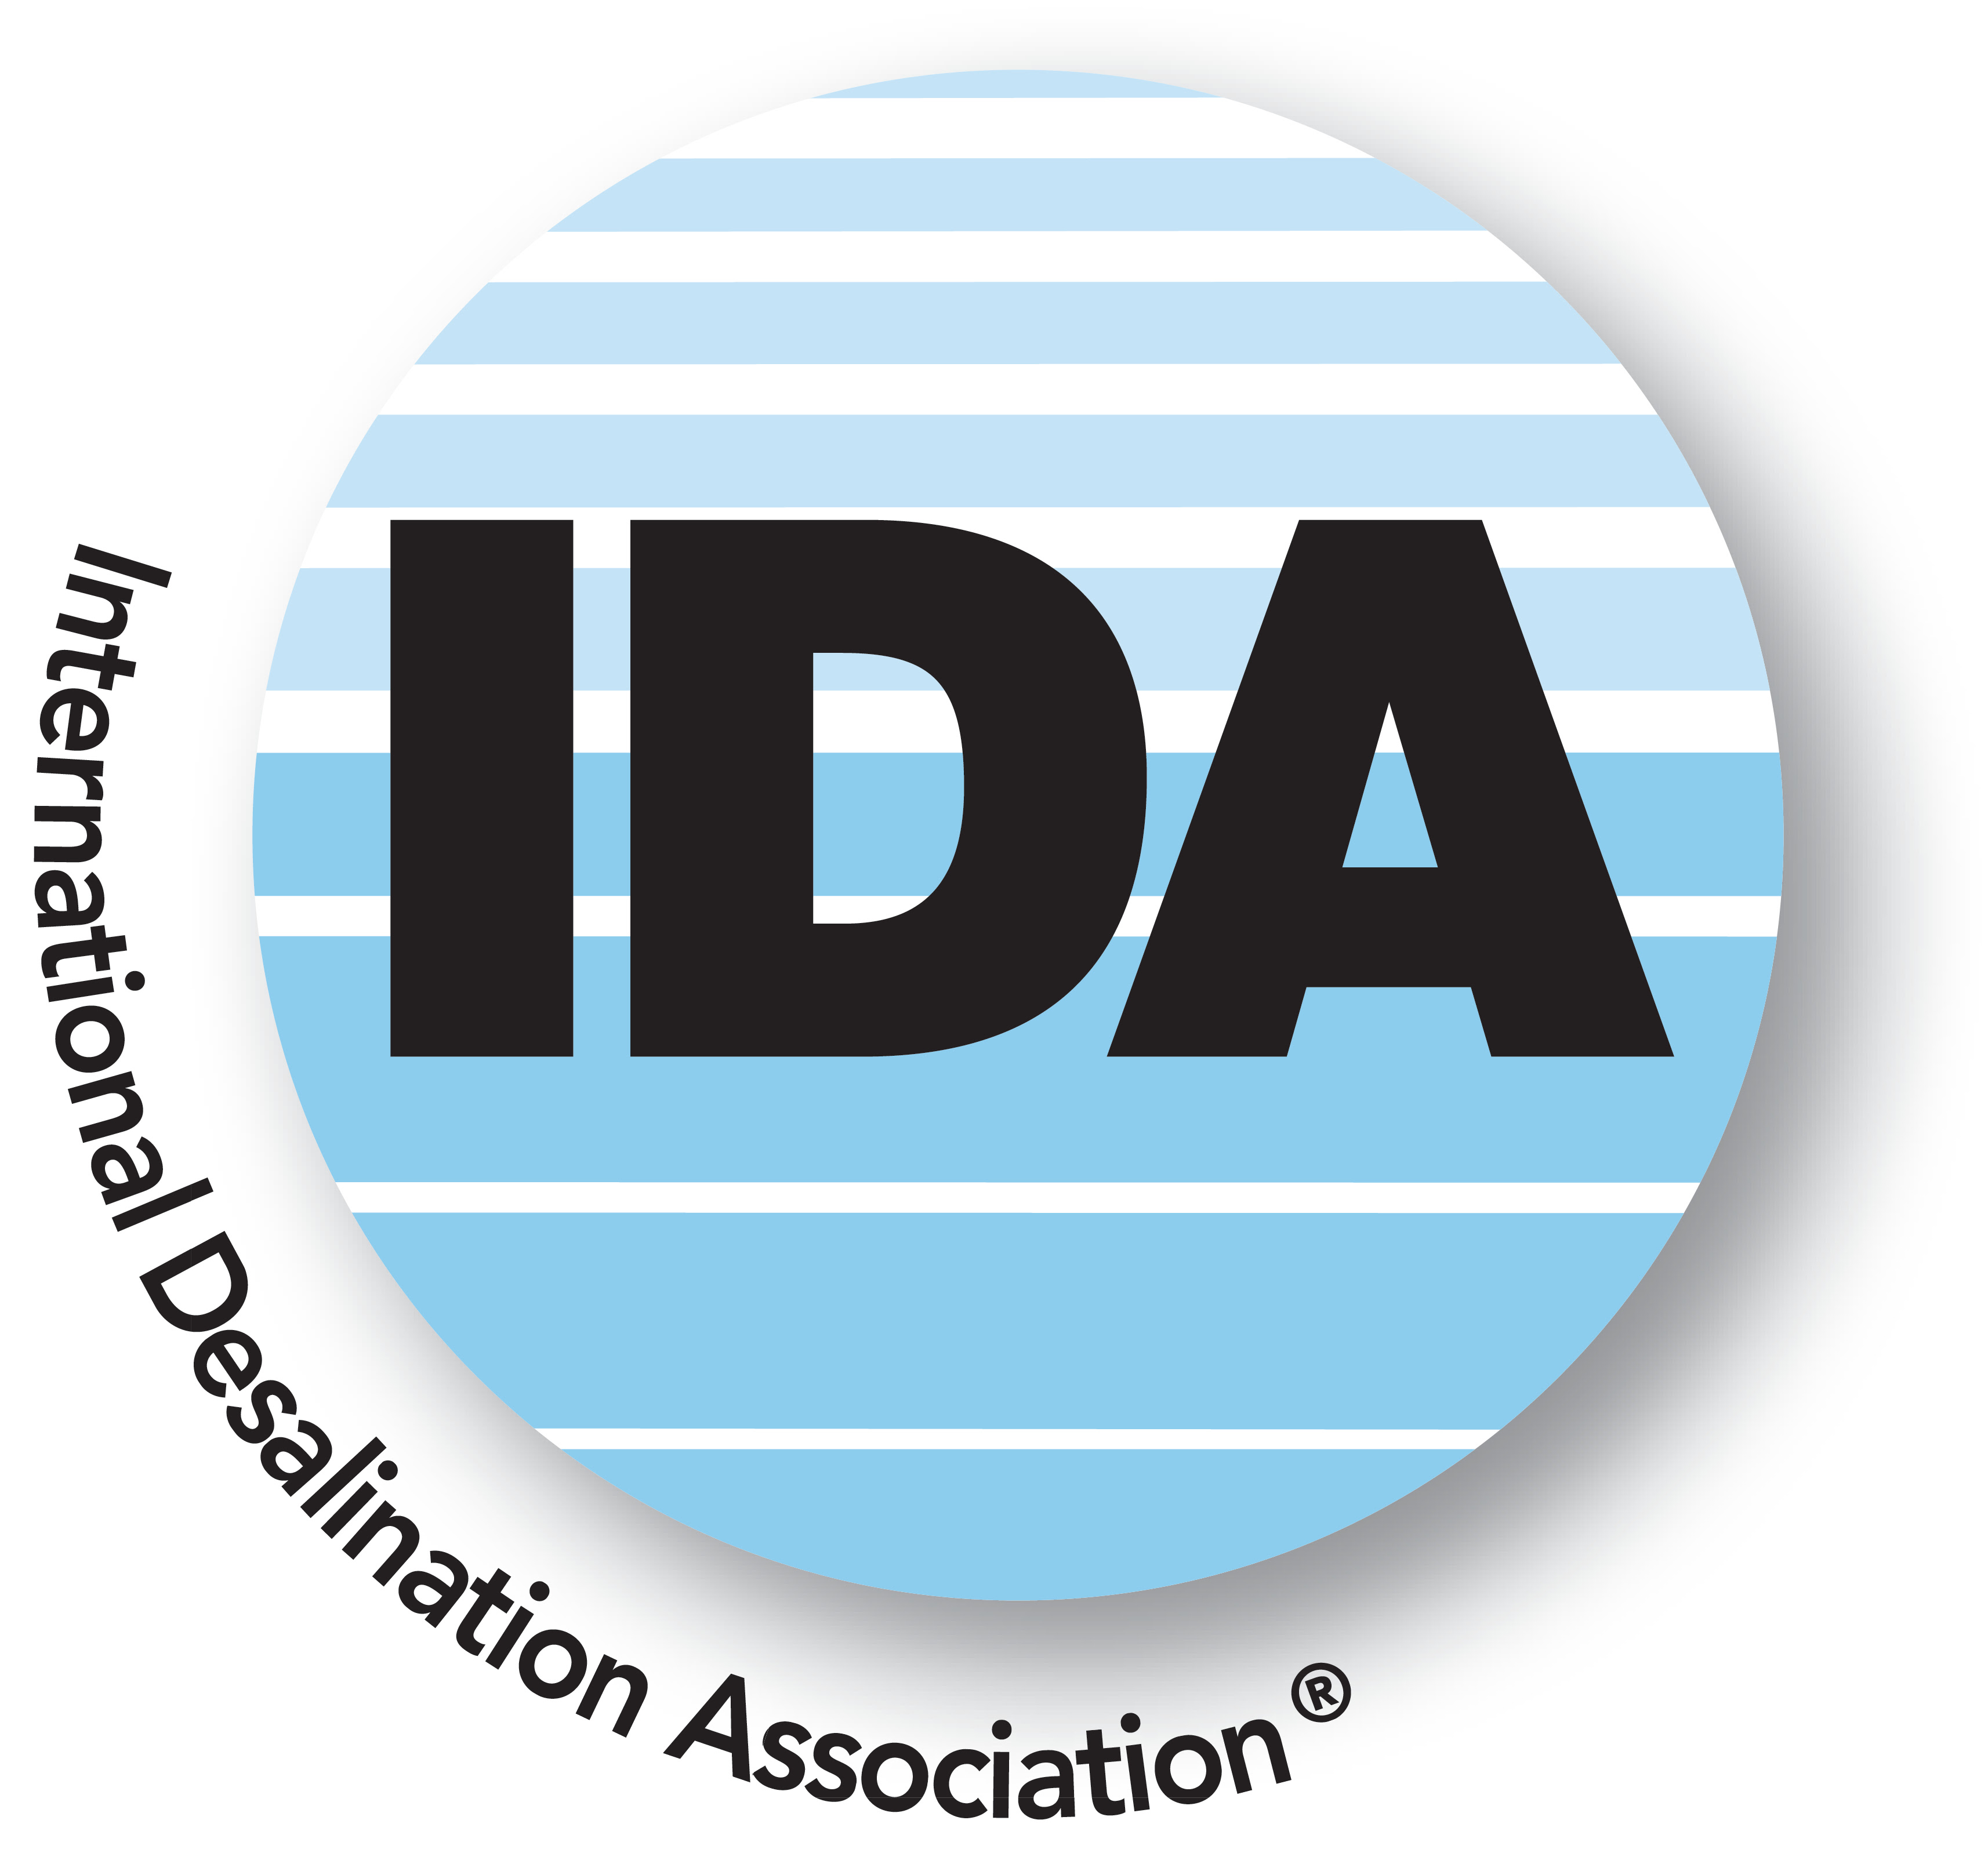 The Advanced Programme for the IDA World Congress has now been announced.